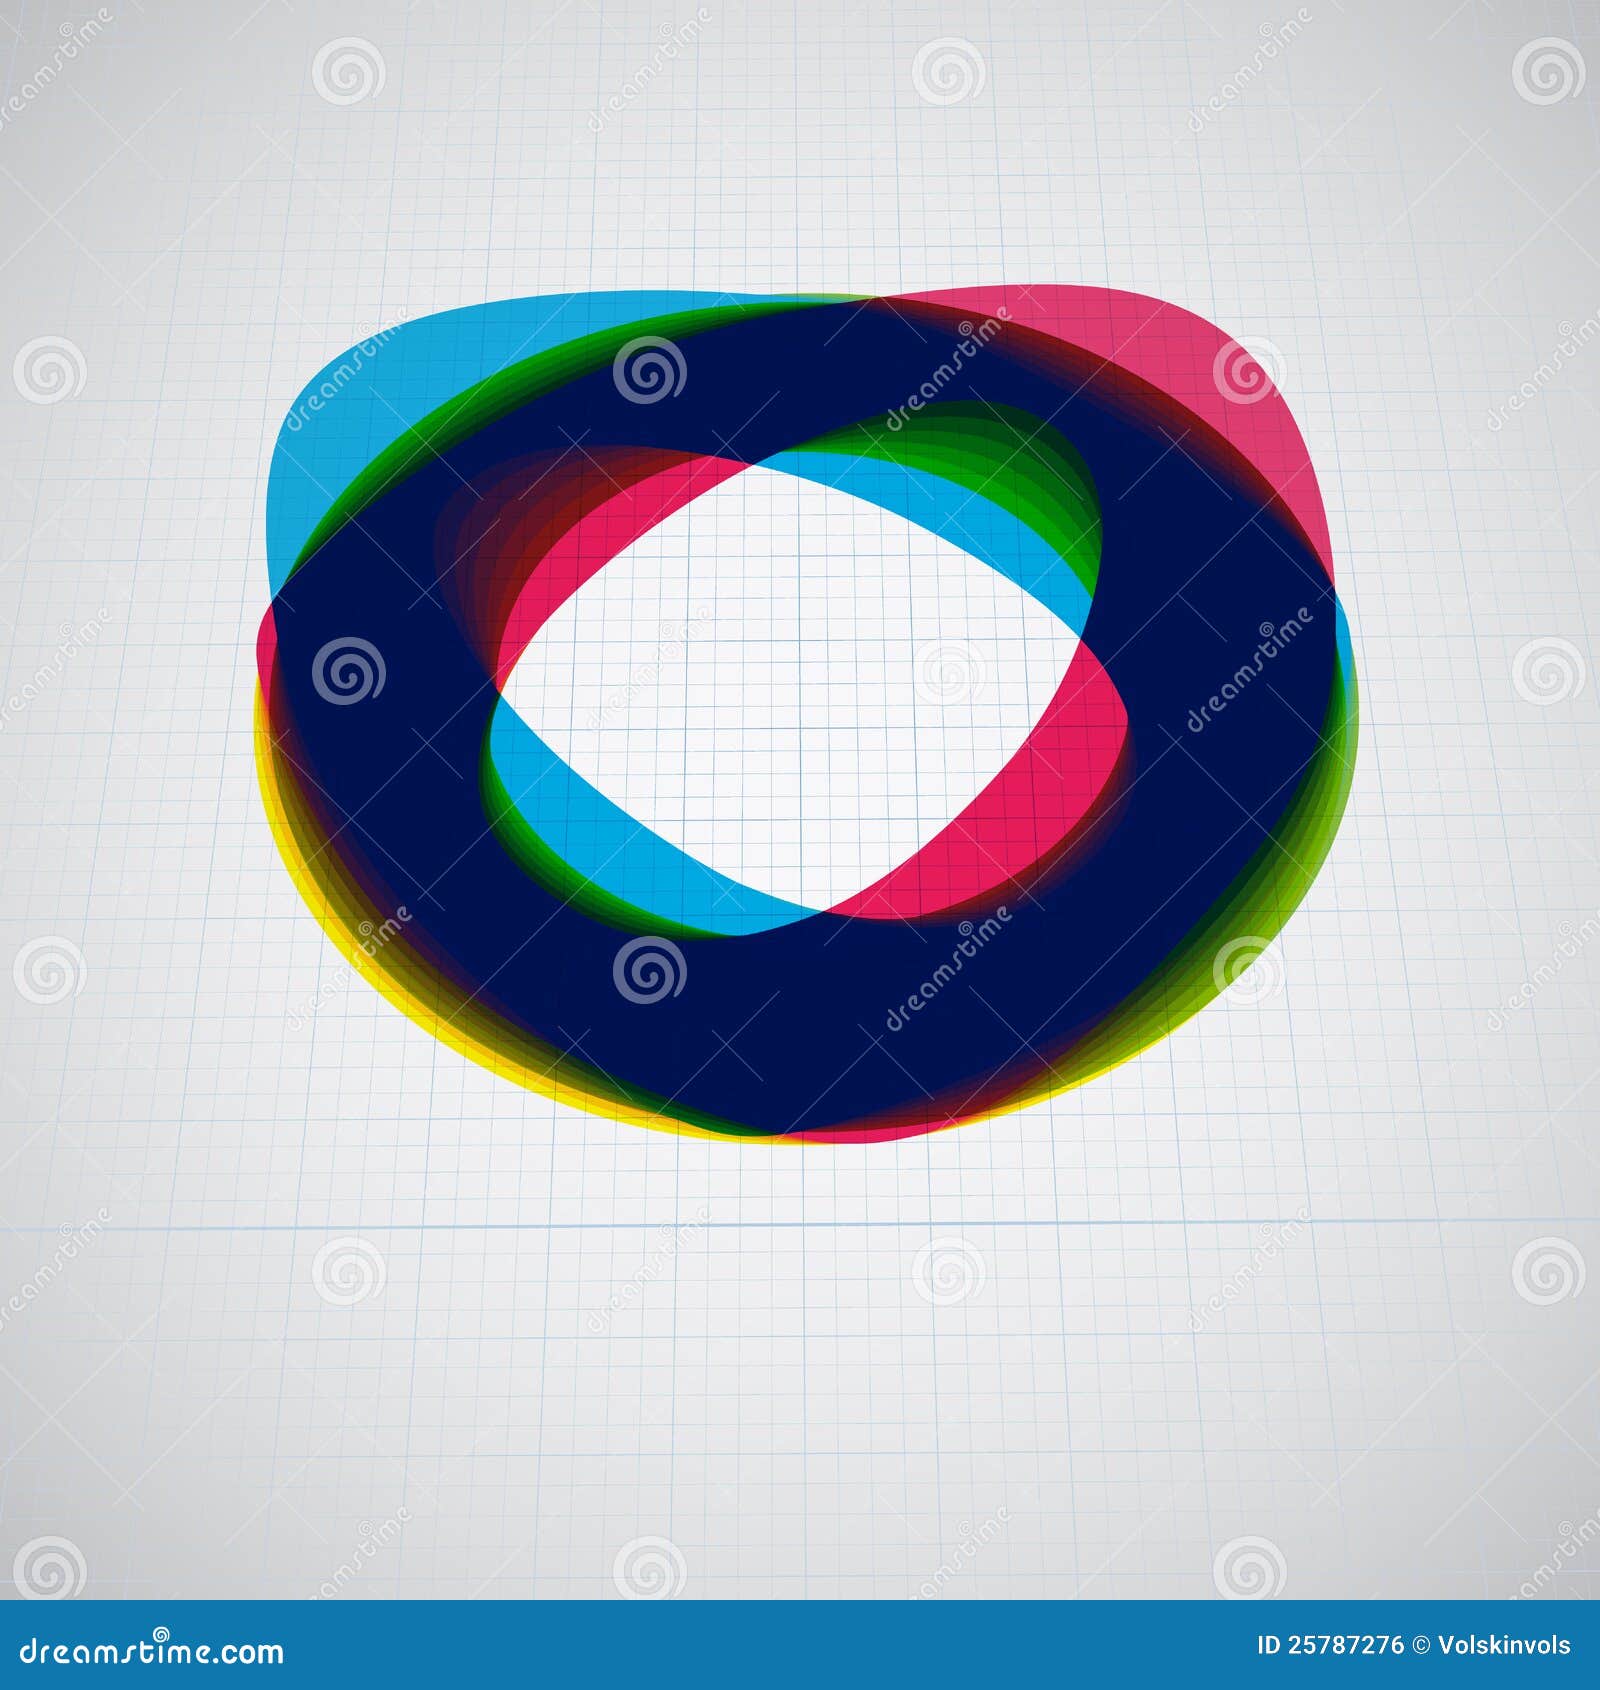 Abstract Symbol stock vector. Illustration of idea, color - 25787276